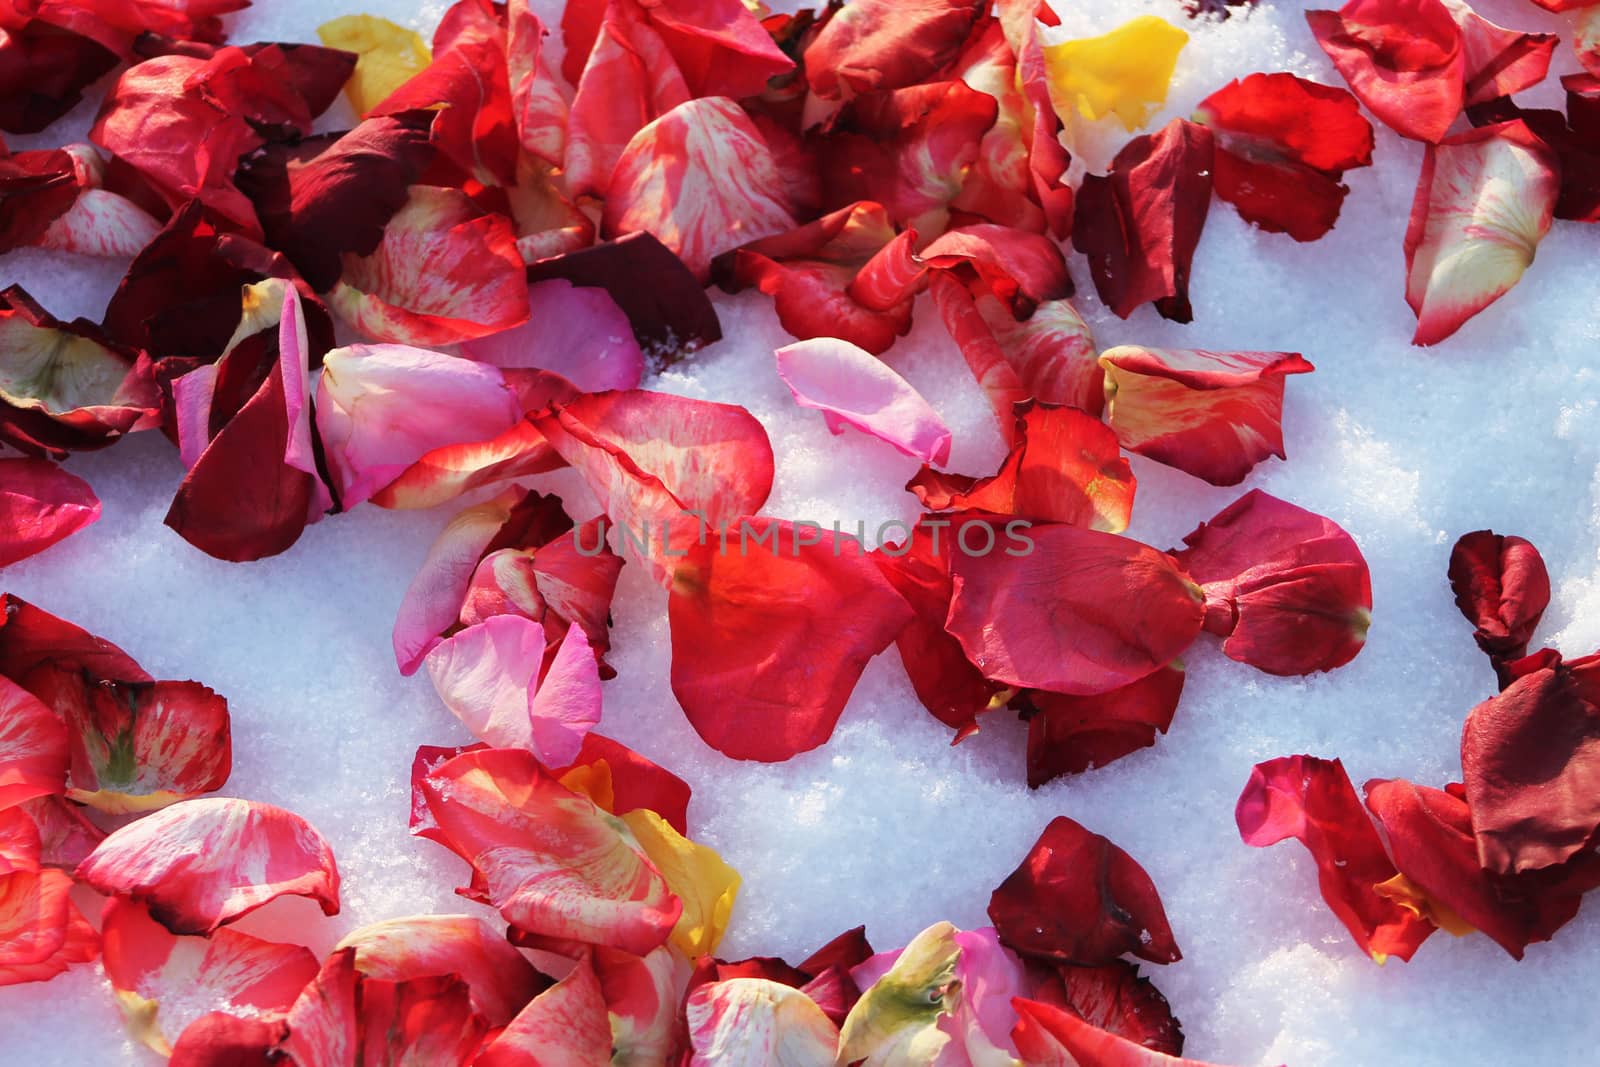 Background of multi-colored rose petals on white snow